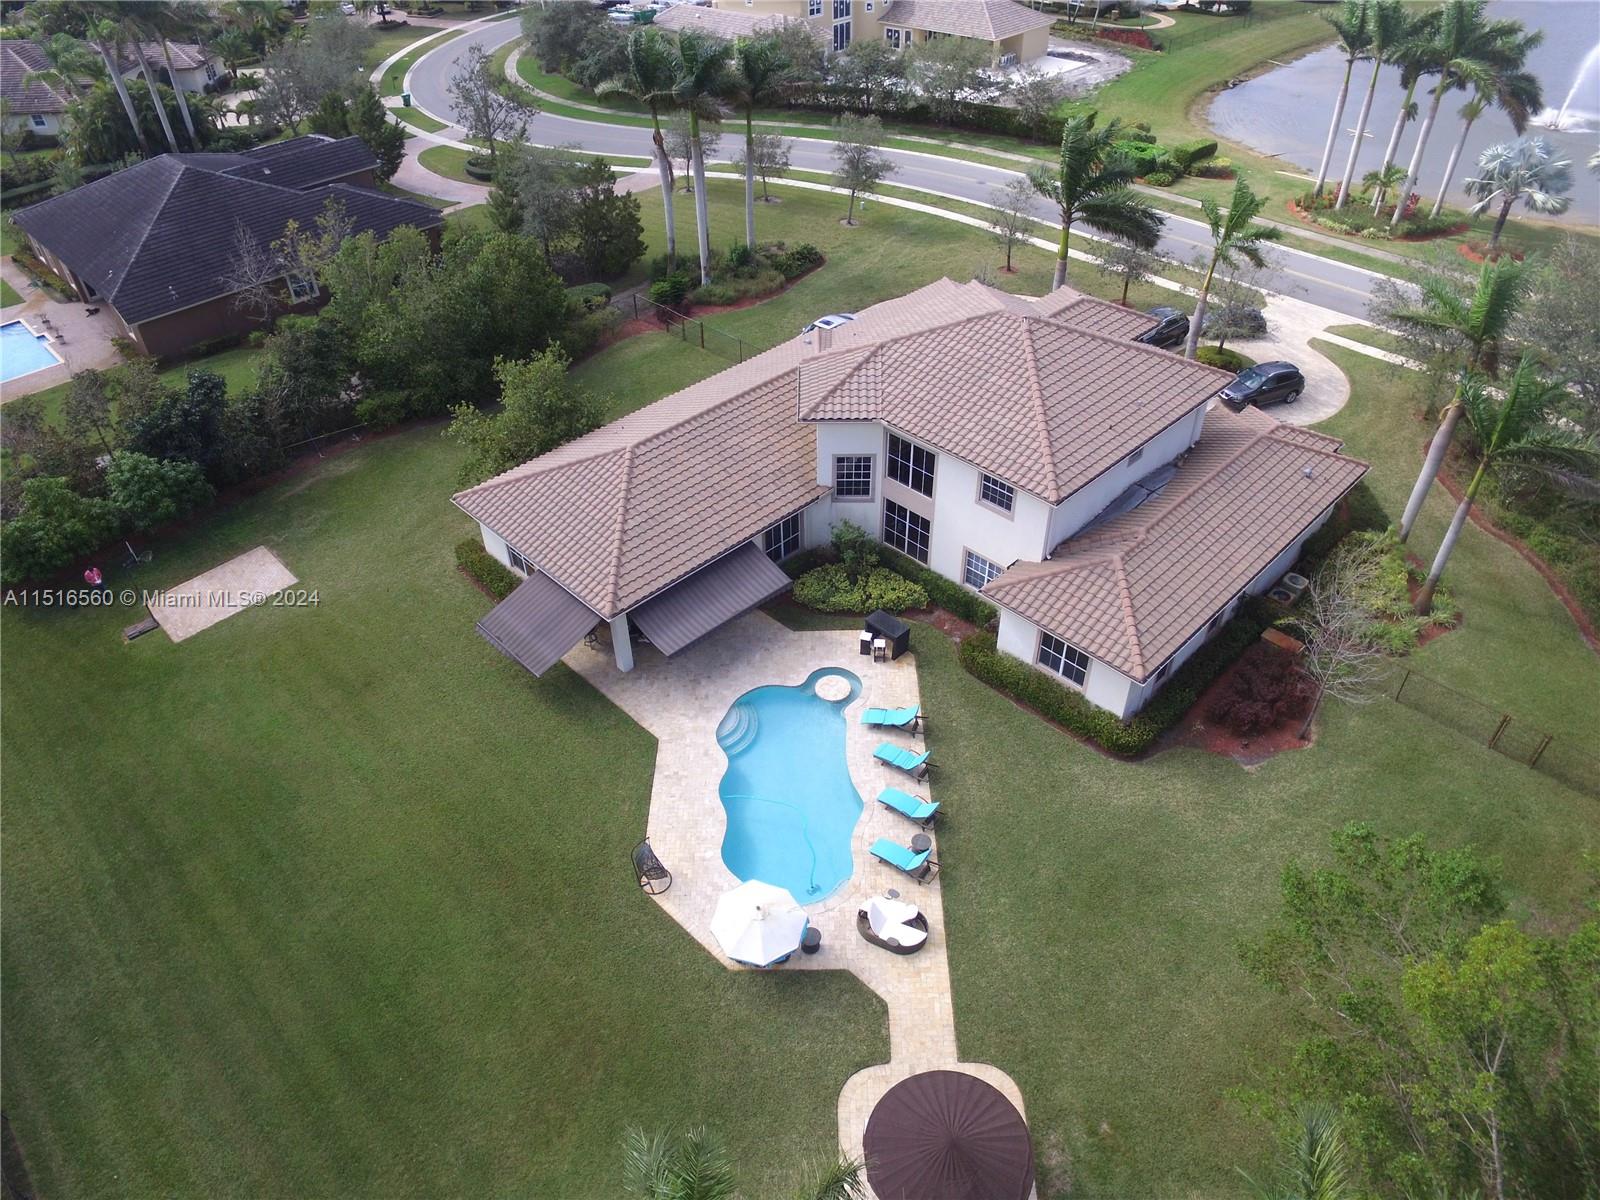 an aerial view of a house with outdoor space pool patio and lake view